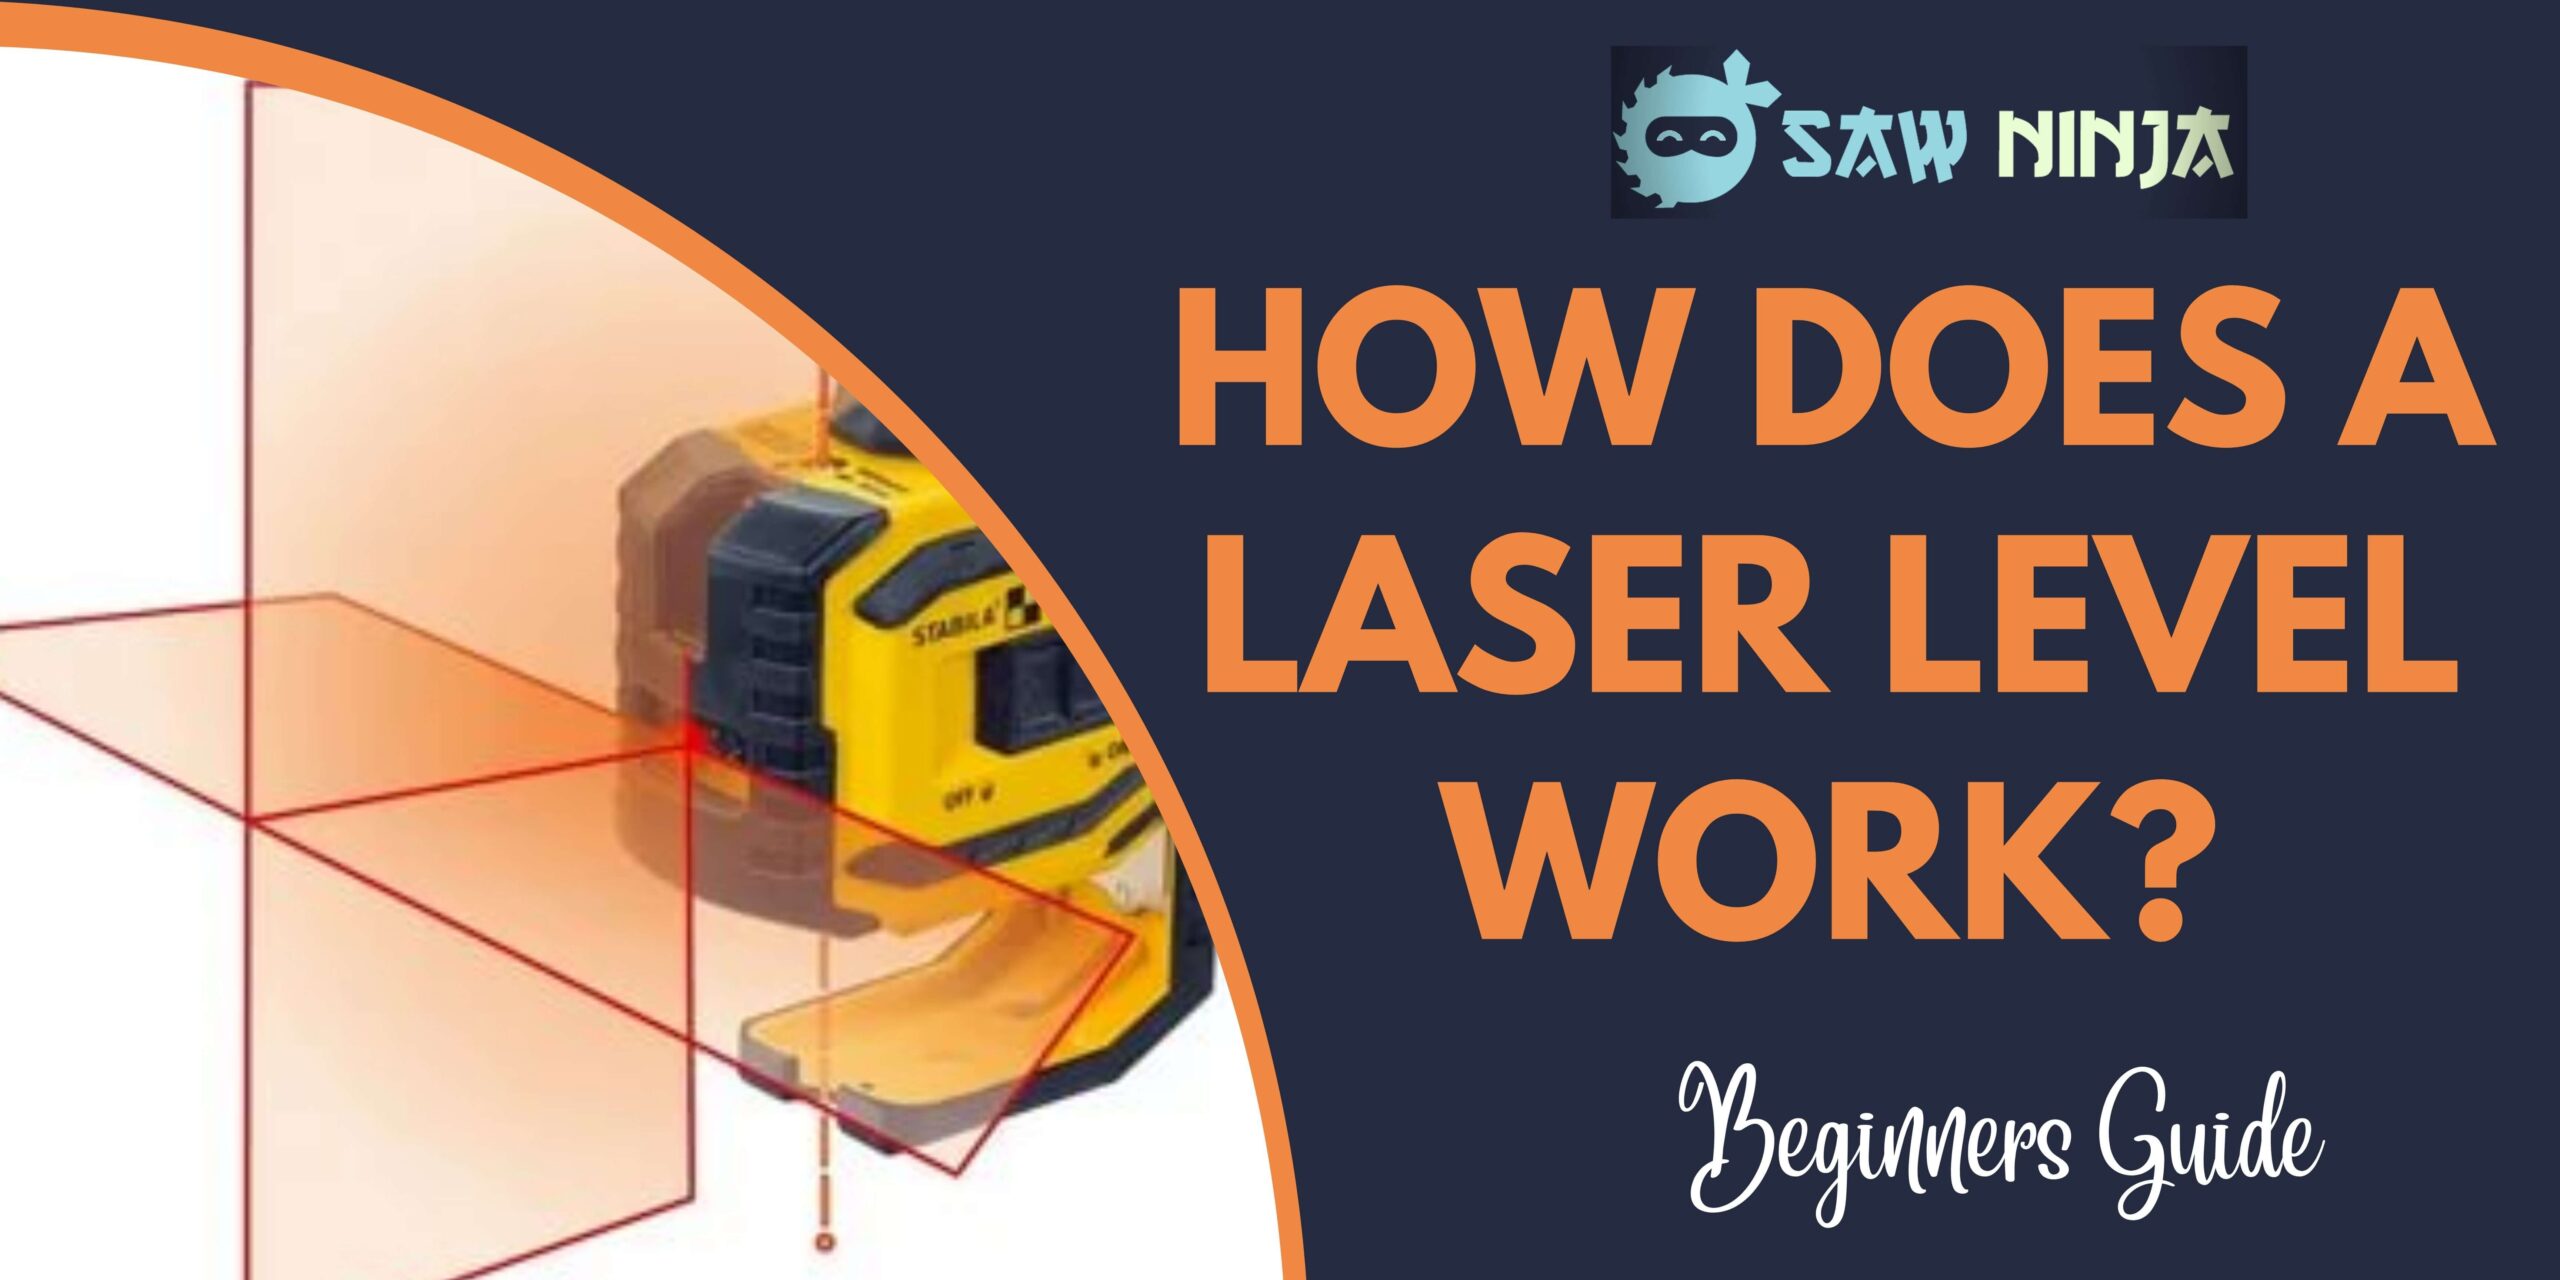 How Does a Laser Level Work